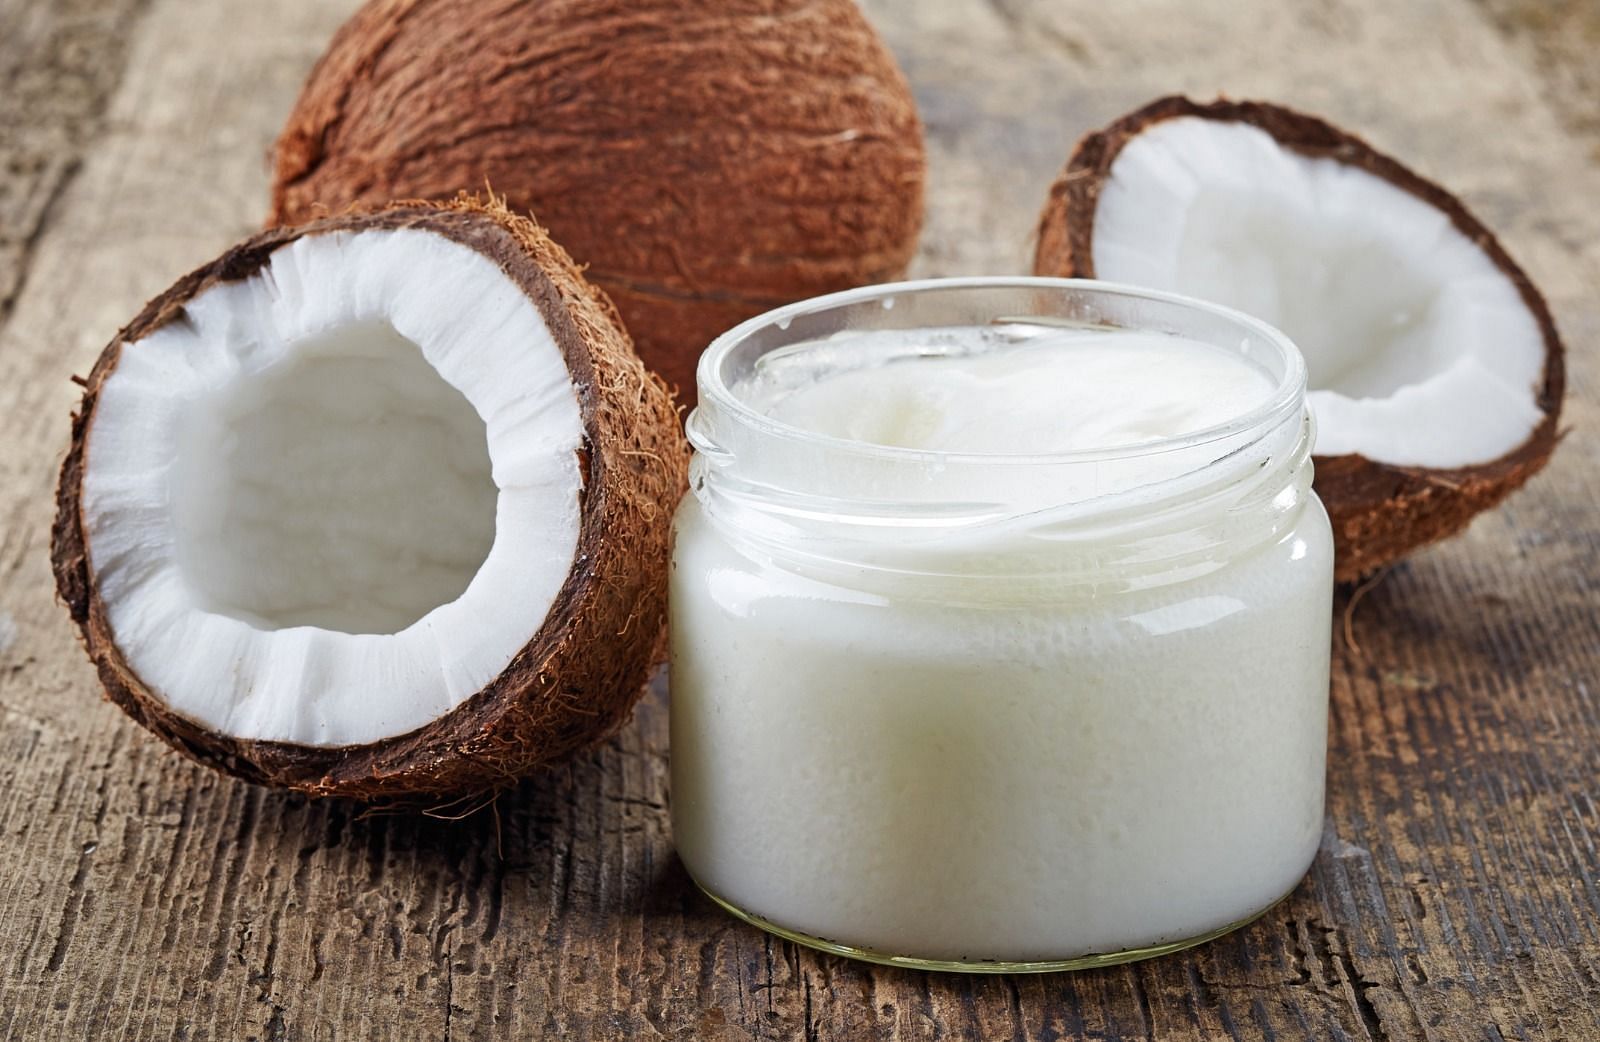 Coconut-oil for cooking (Image via Getty Images)